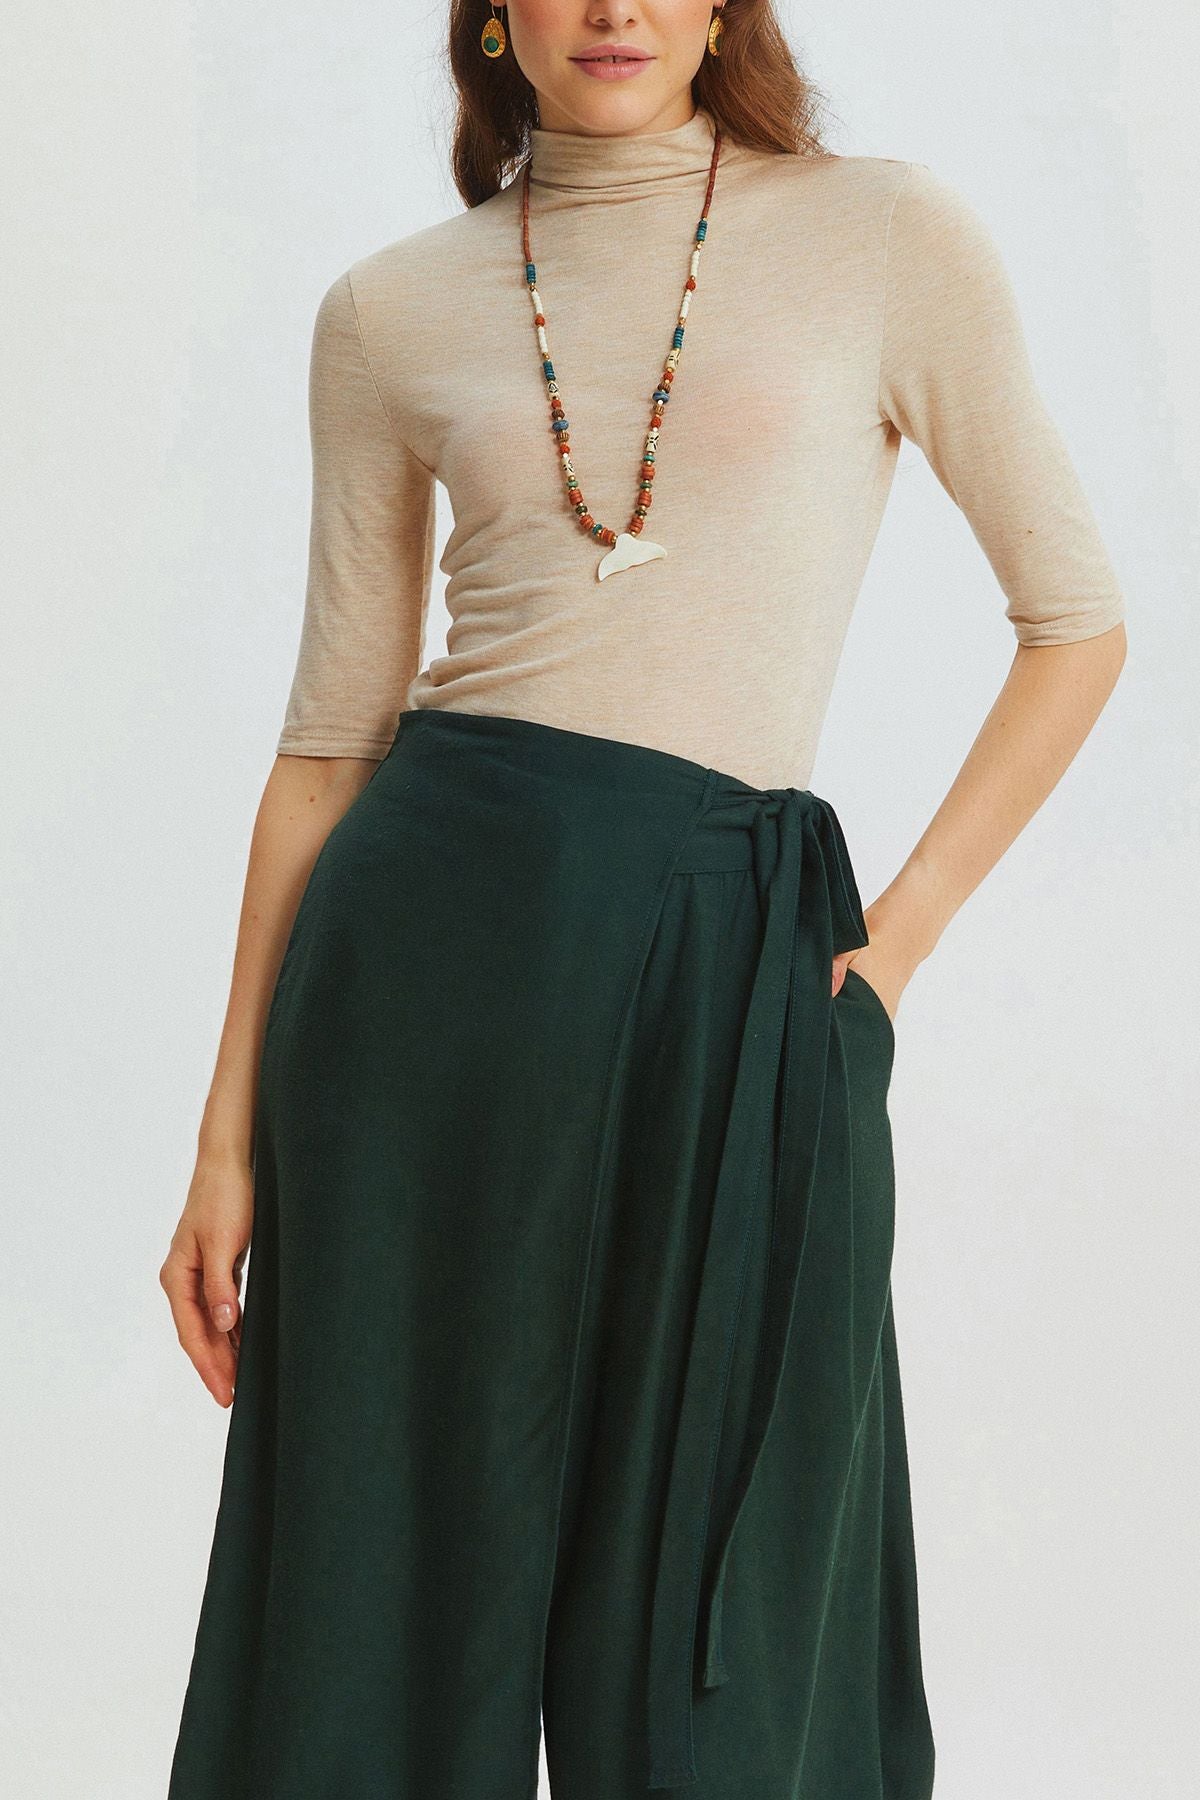 Solid Color Skirted Pants Green